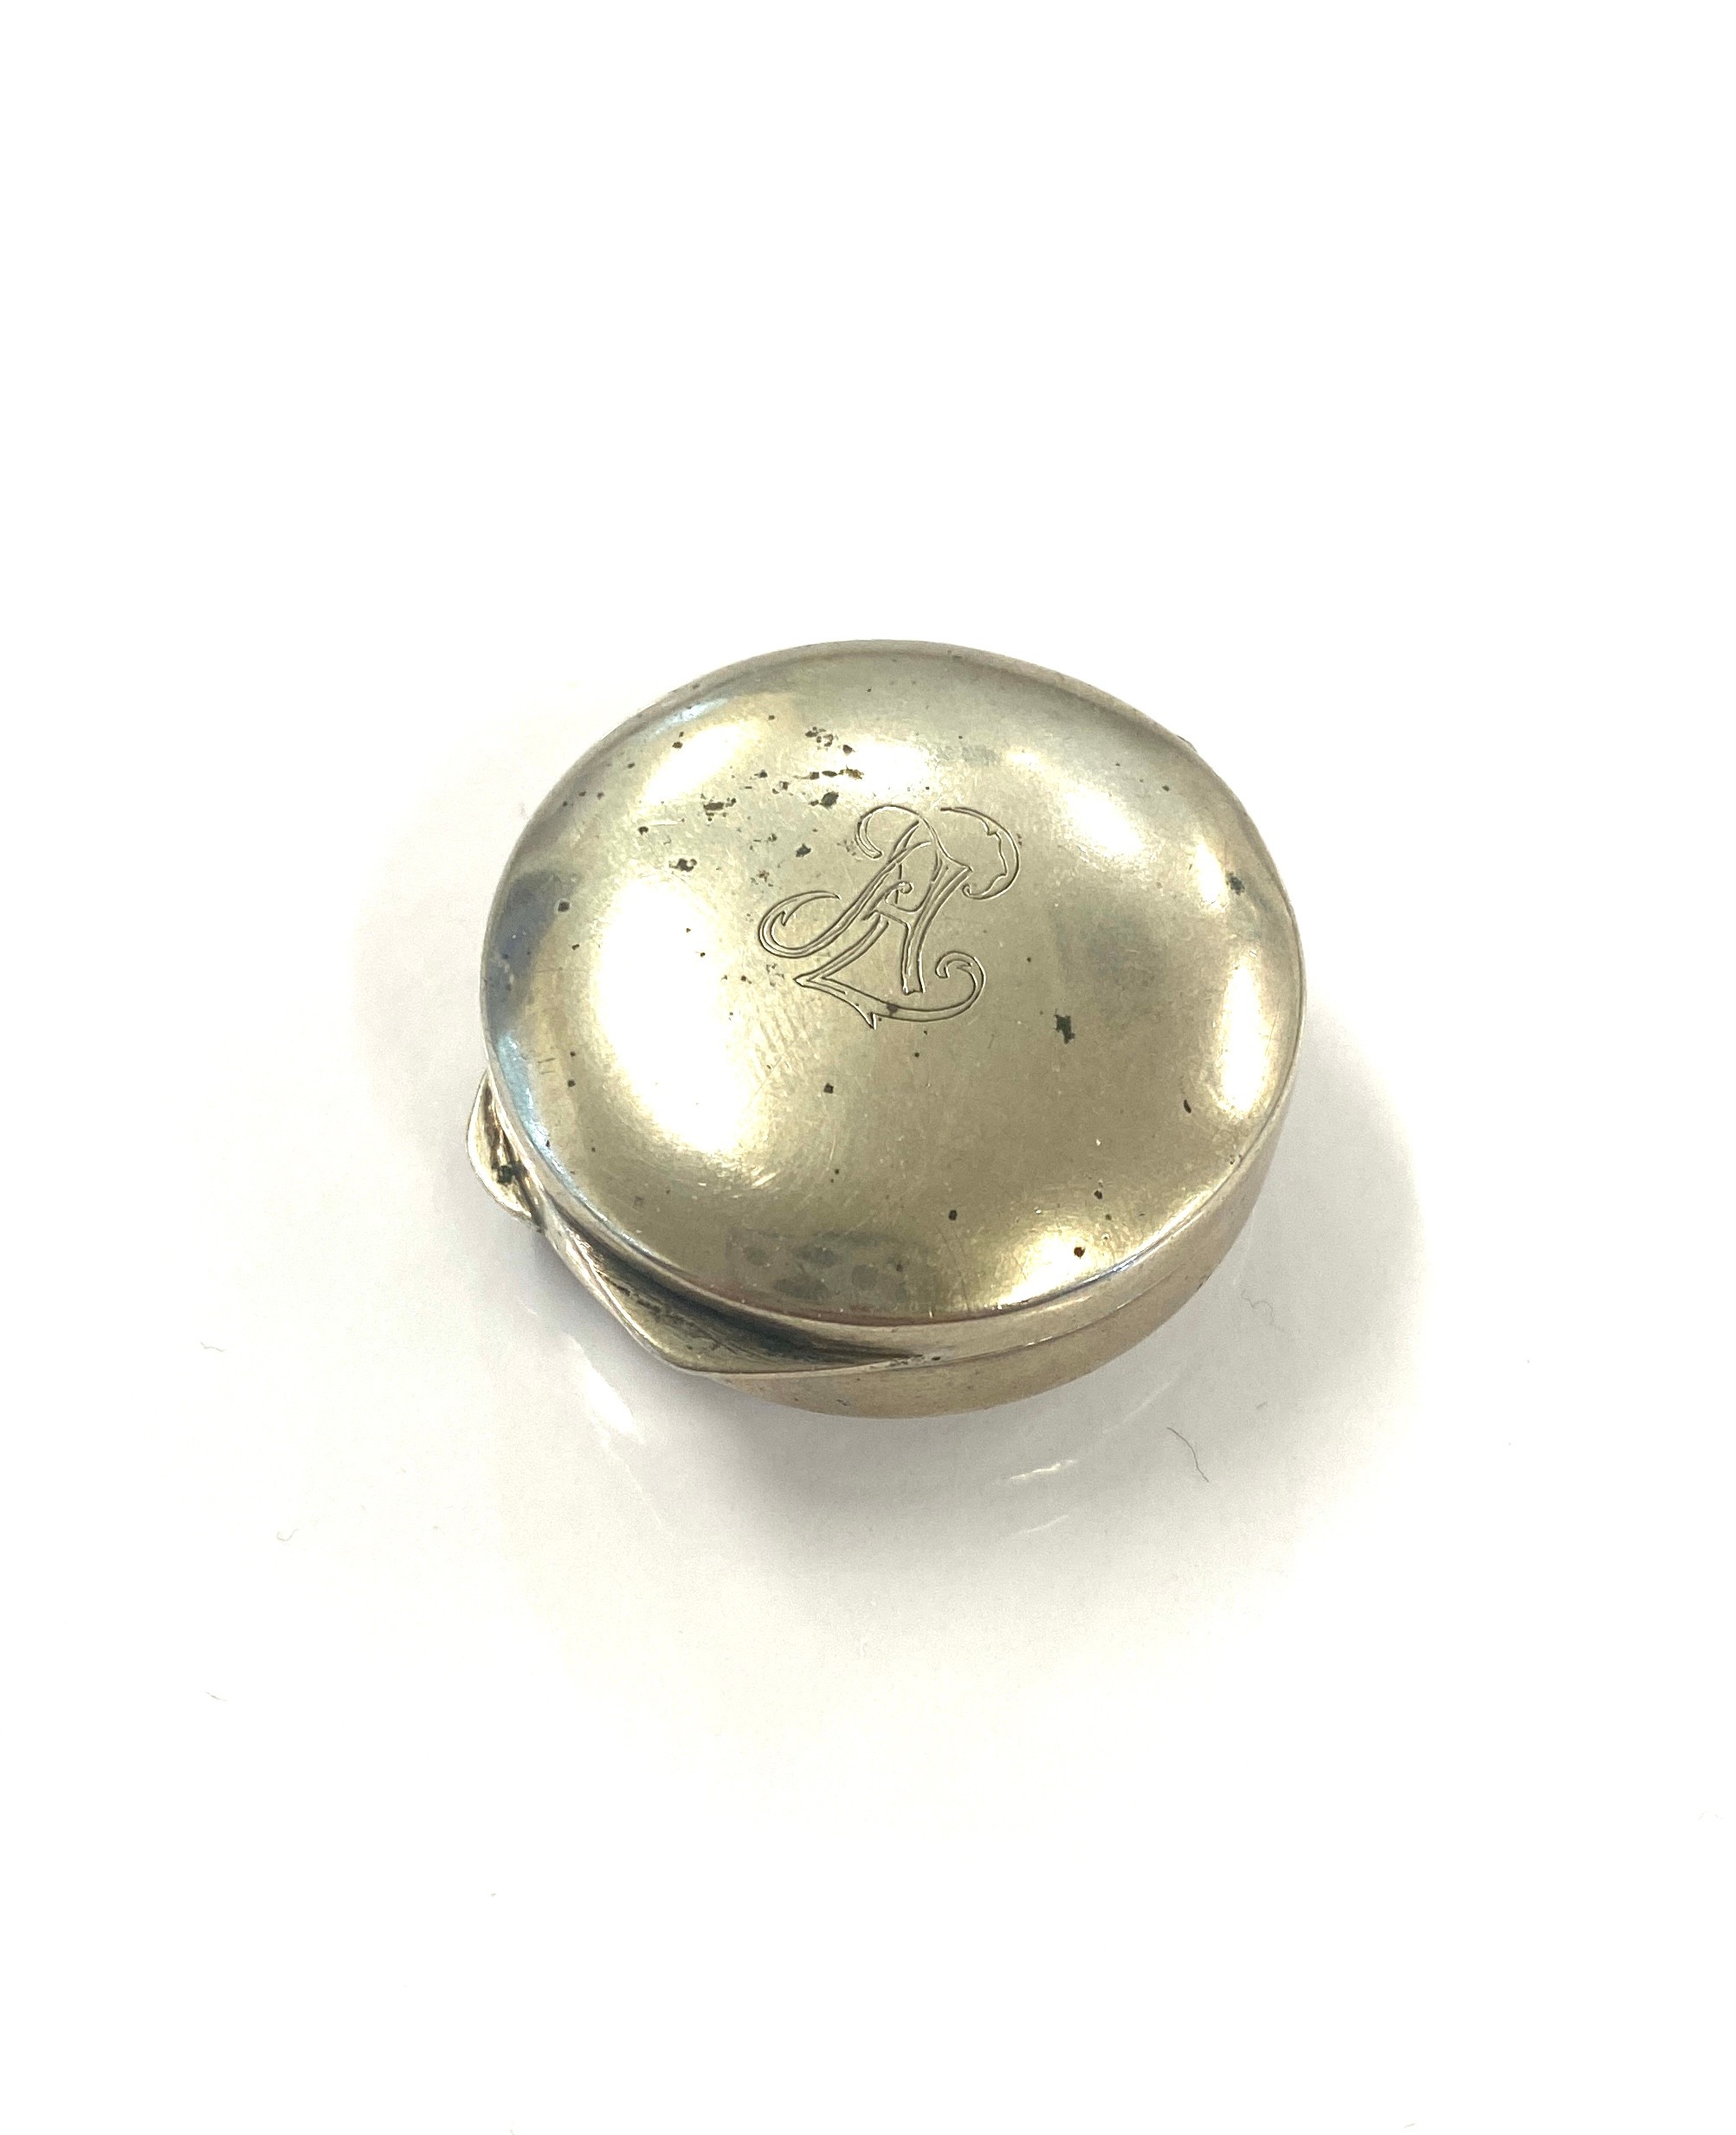 Continental silver pill box weight approx 16g - Image 2 of 4